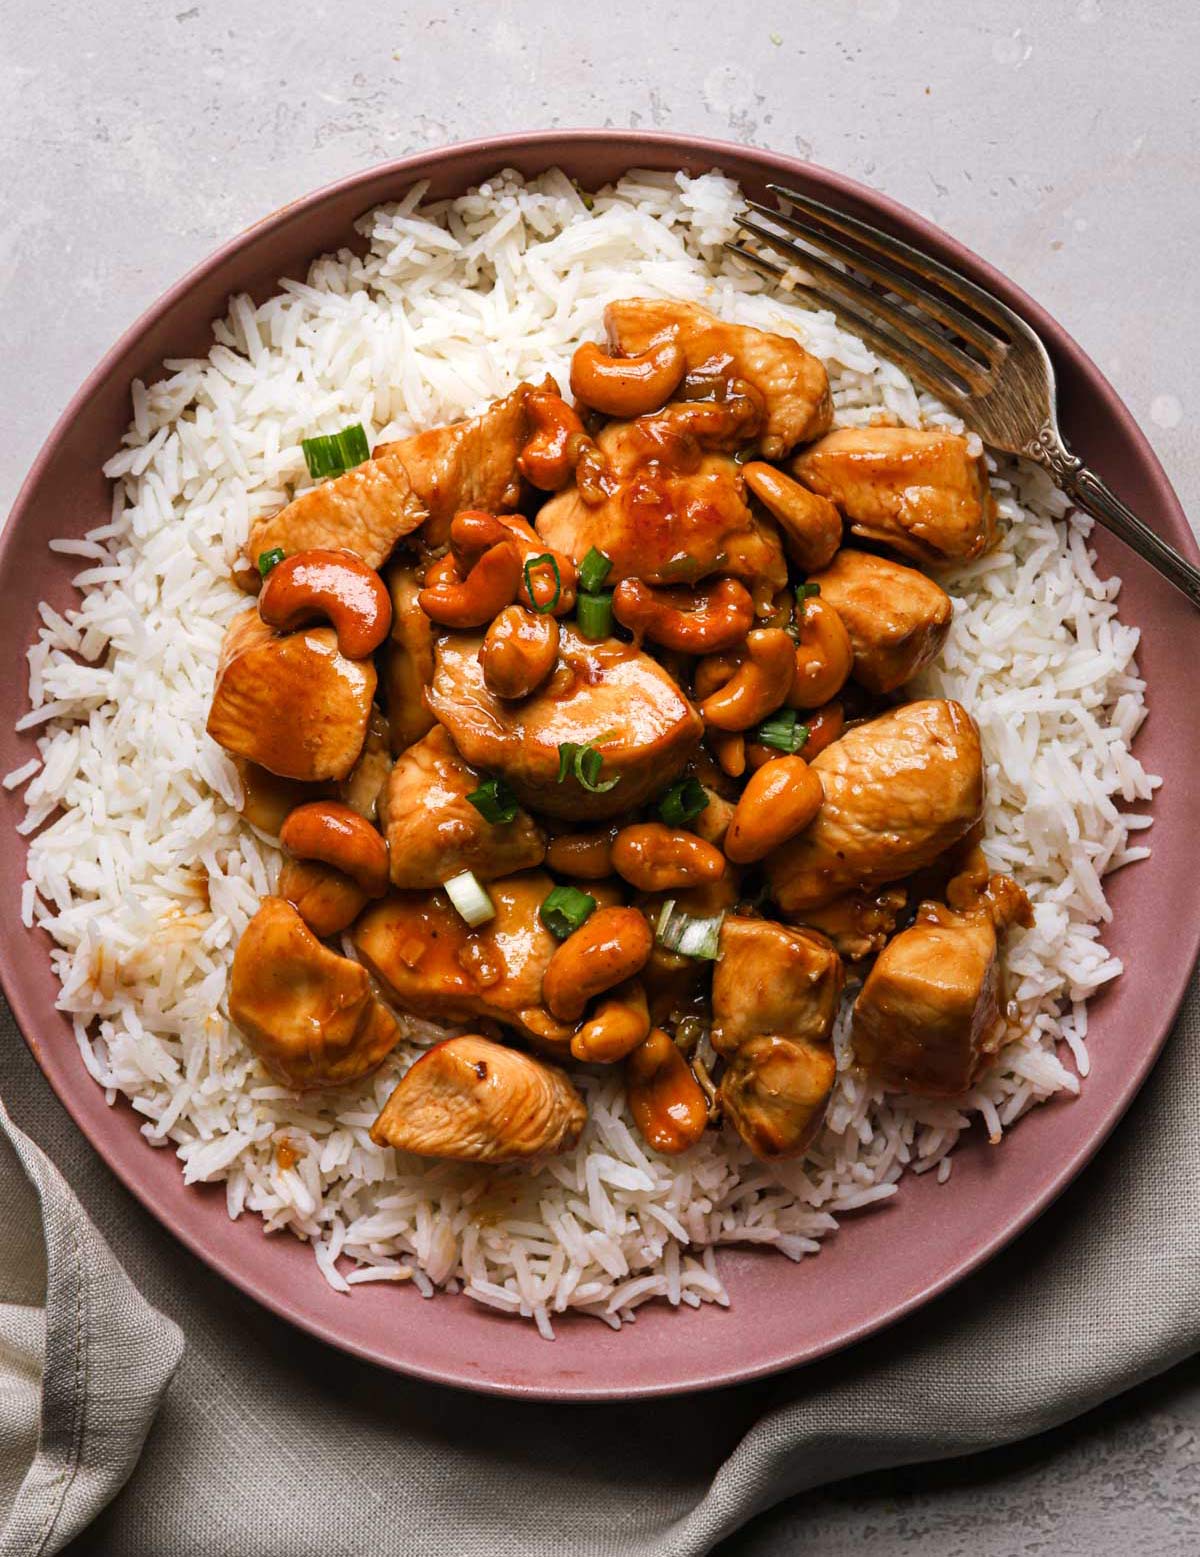 Stir-fried cashew chicken over white rice on a pink plate with a fork on the side.